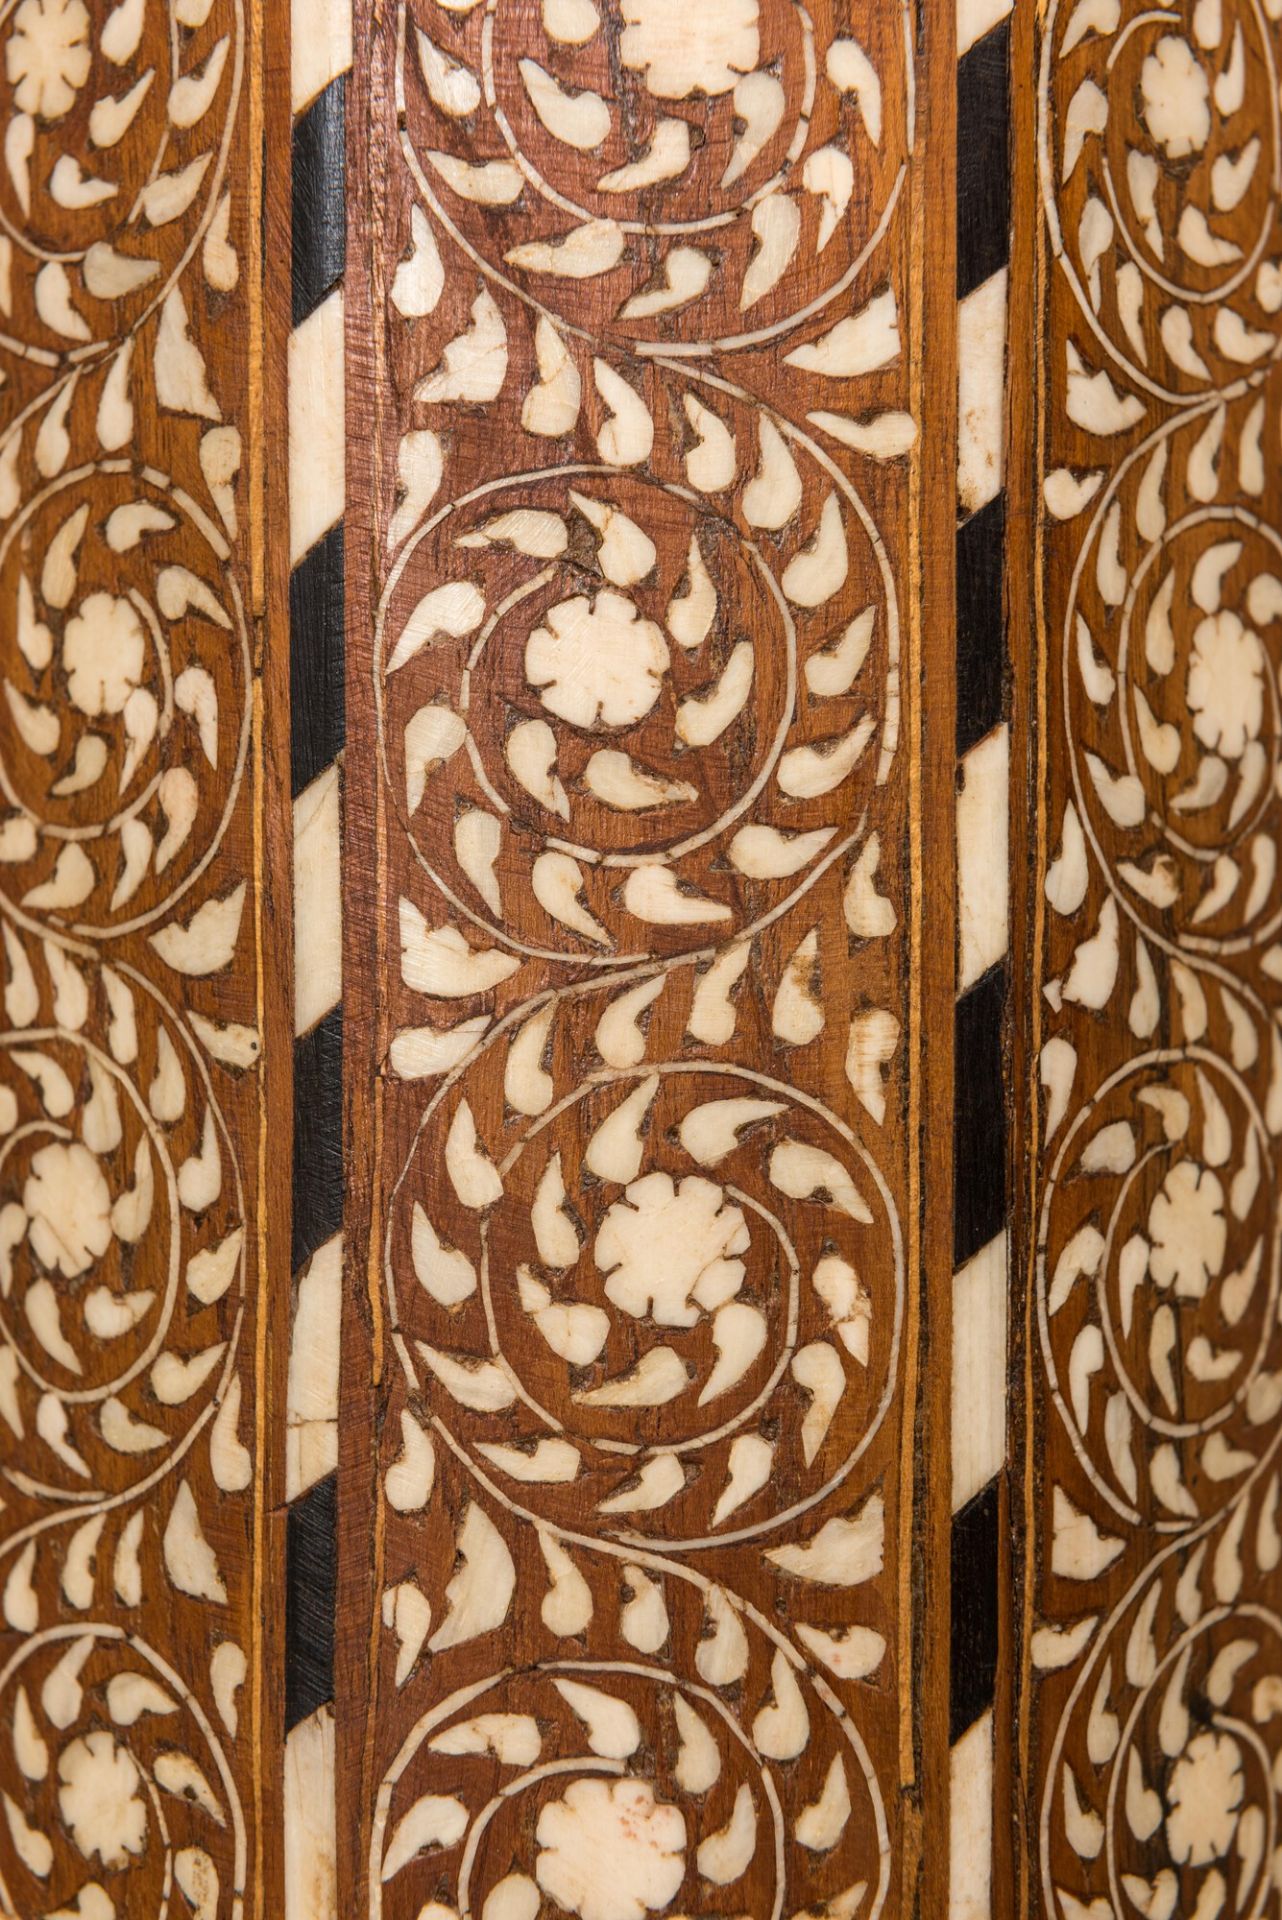 A pair of large Islamic bone-inlaid wooden columns, Syria or Northern Africa, 19th C. - Image 3 of 4